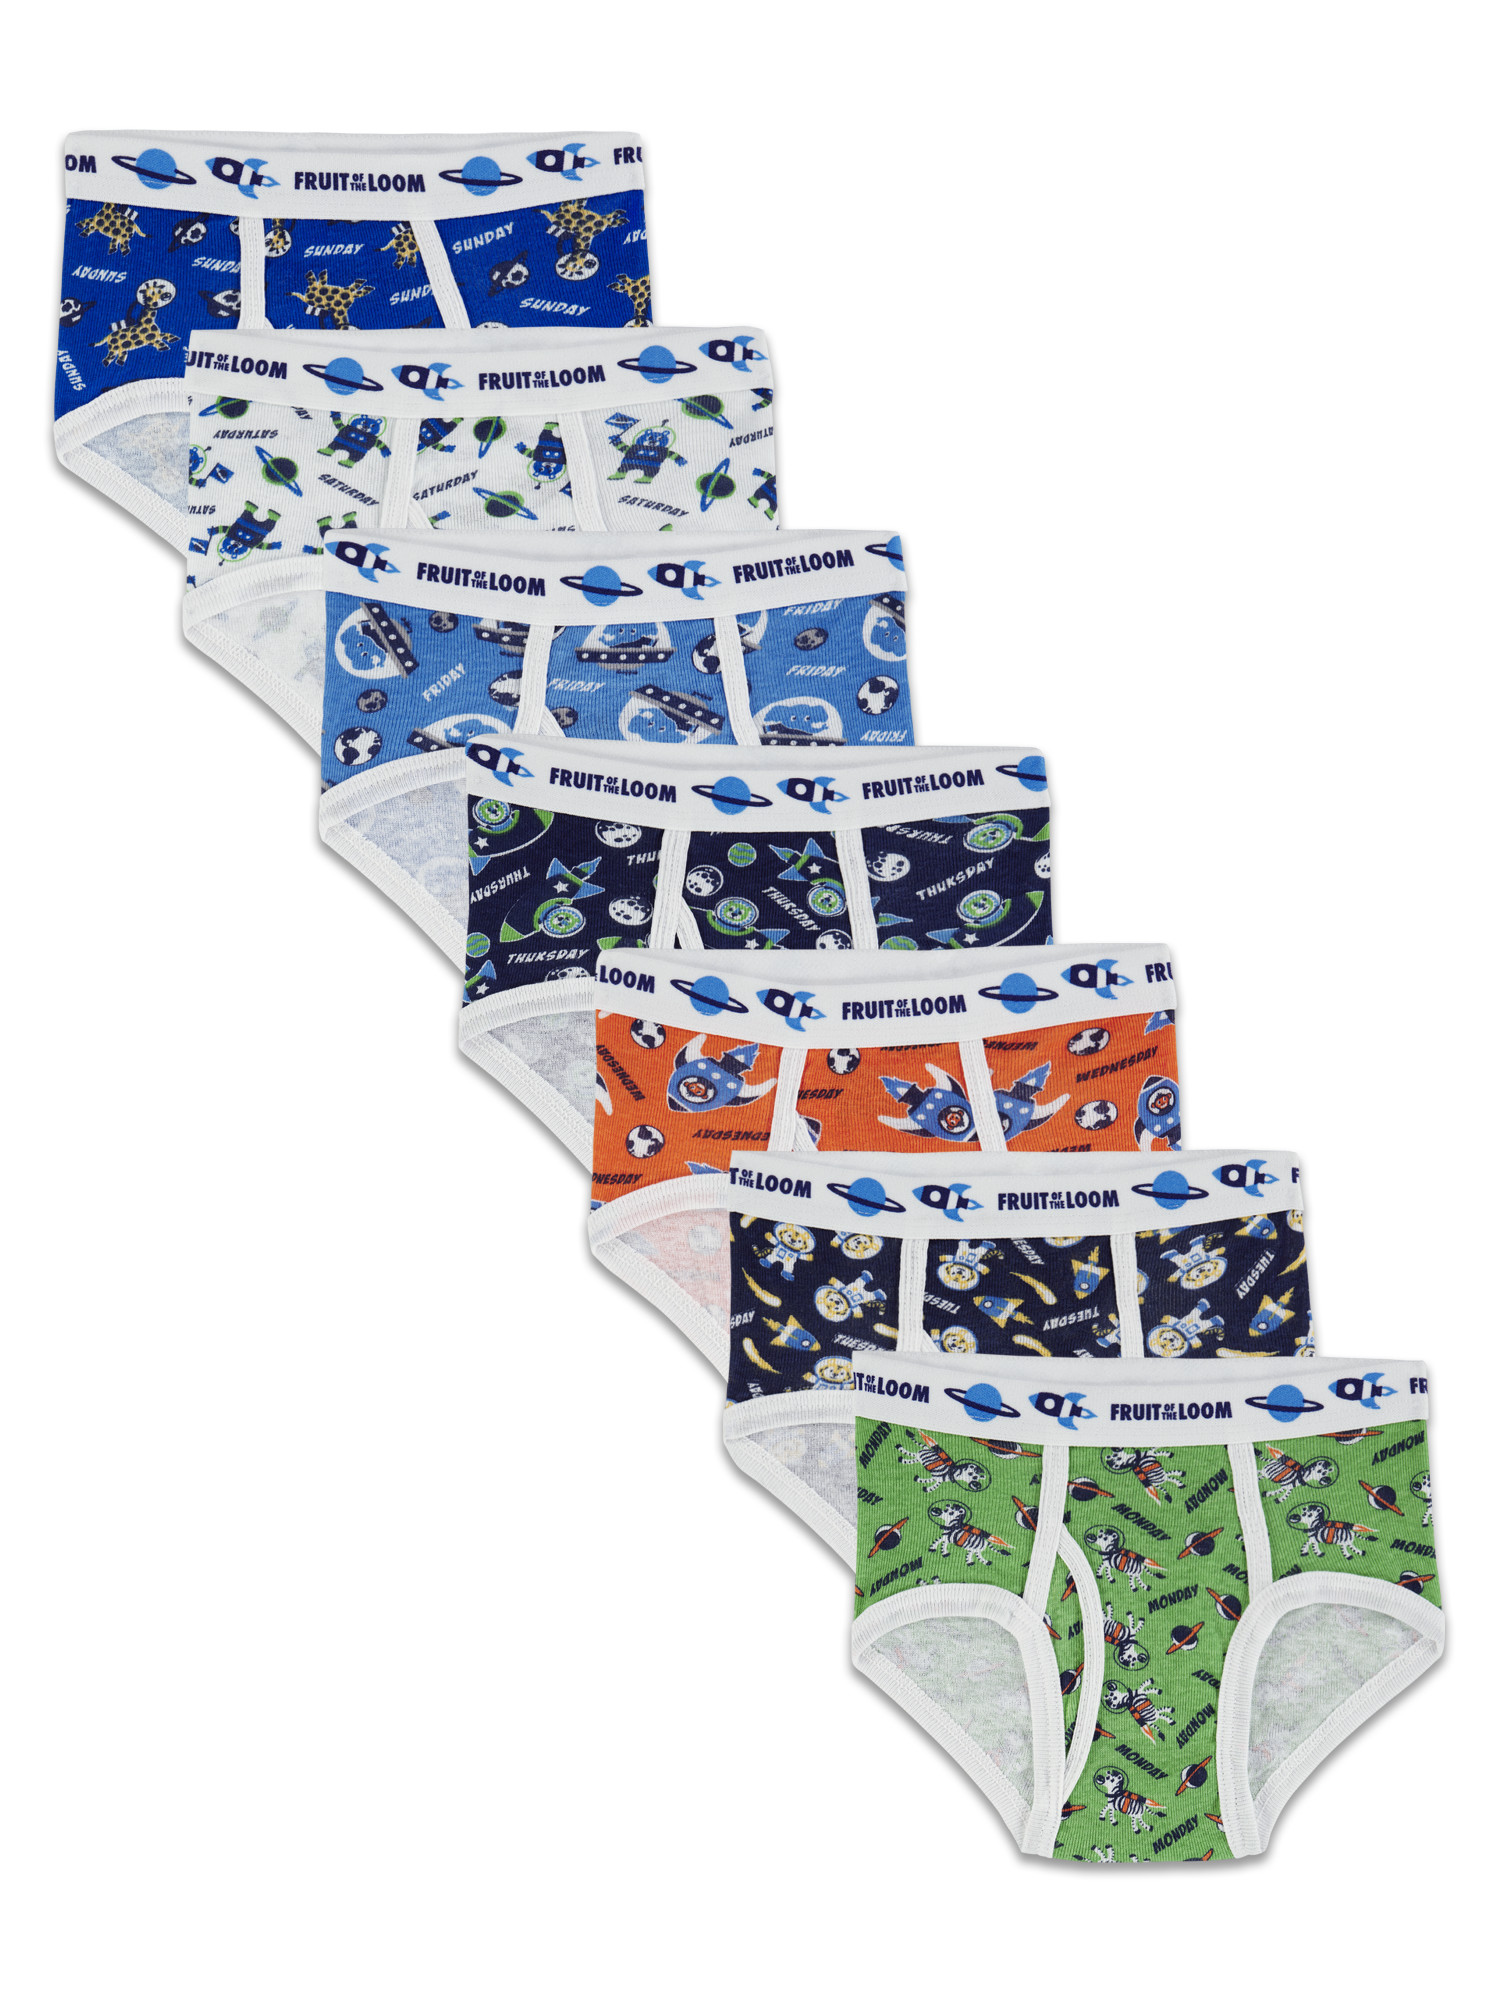 Fruit of the Loom Toddler Boy Cotton Briefs, 7 Pack - image 1 of 11